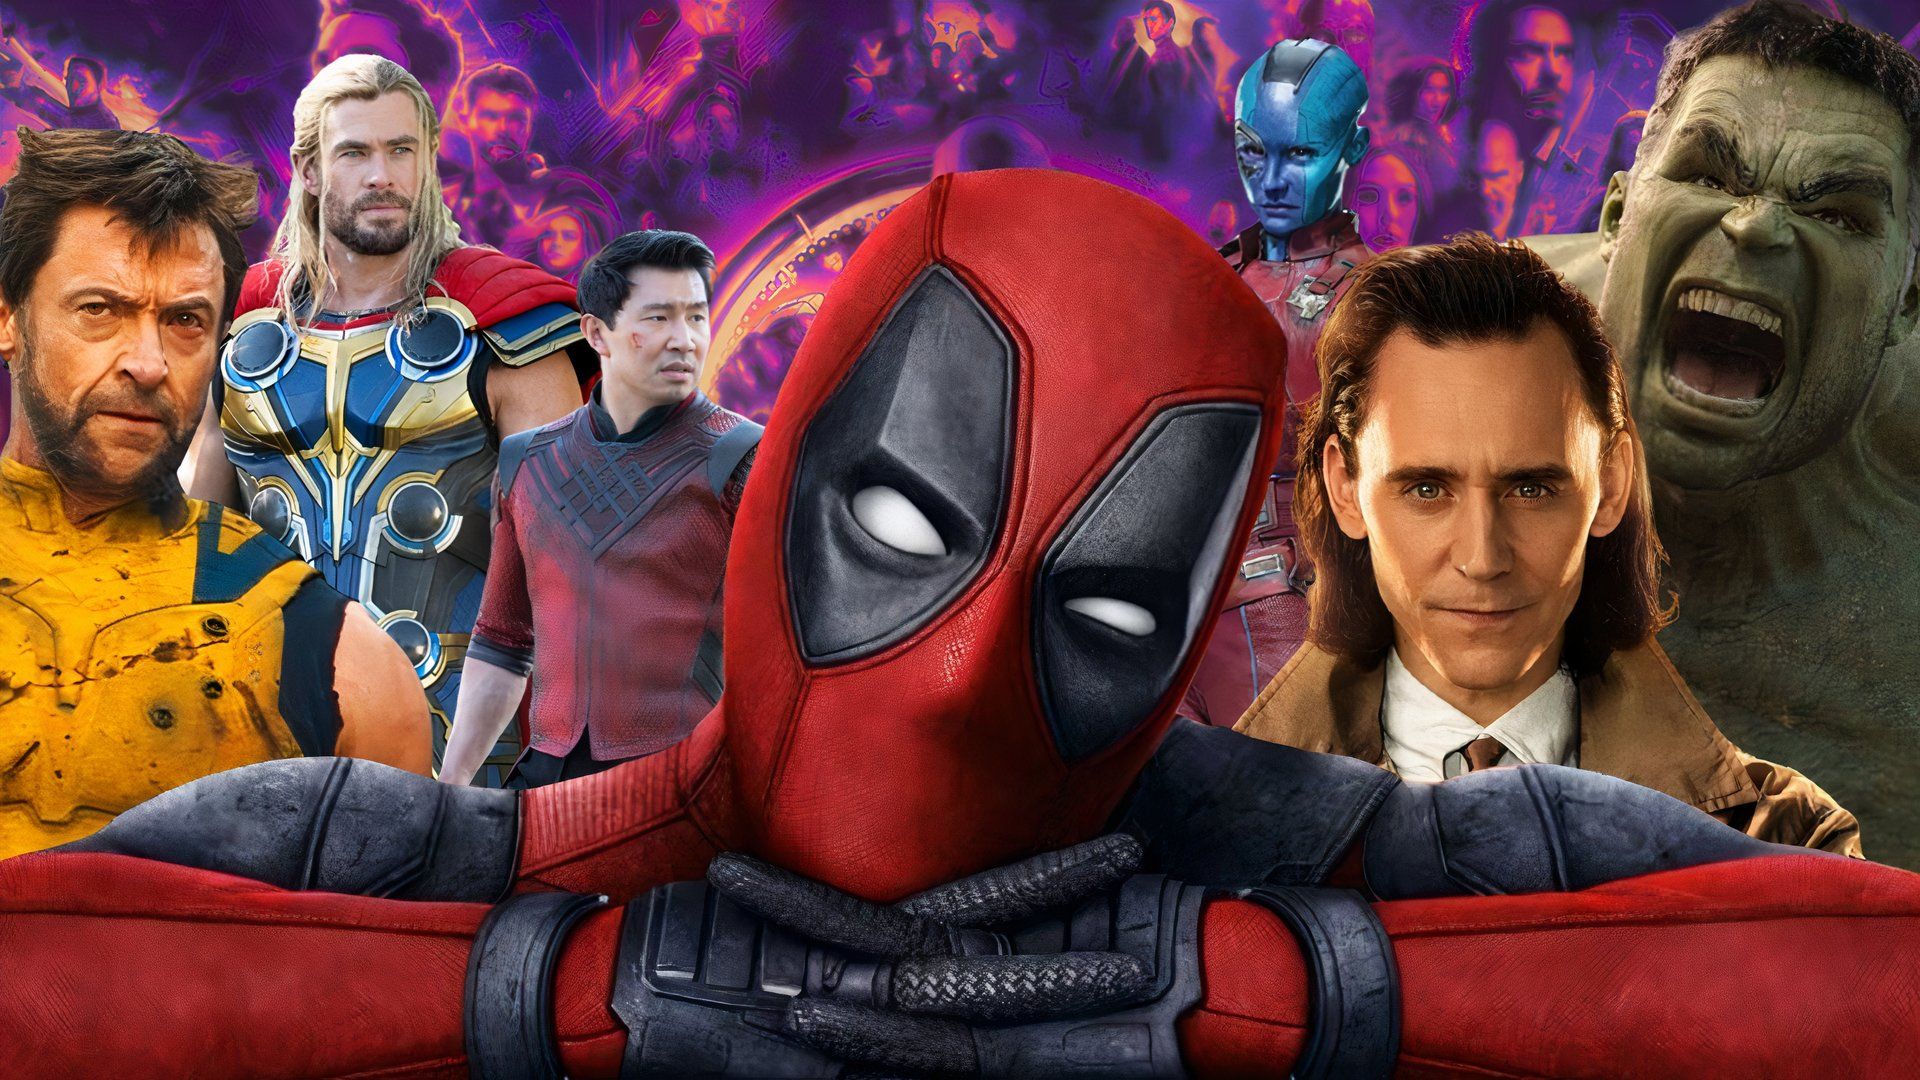 Deadpool, The Avengers, and the MCU.